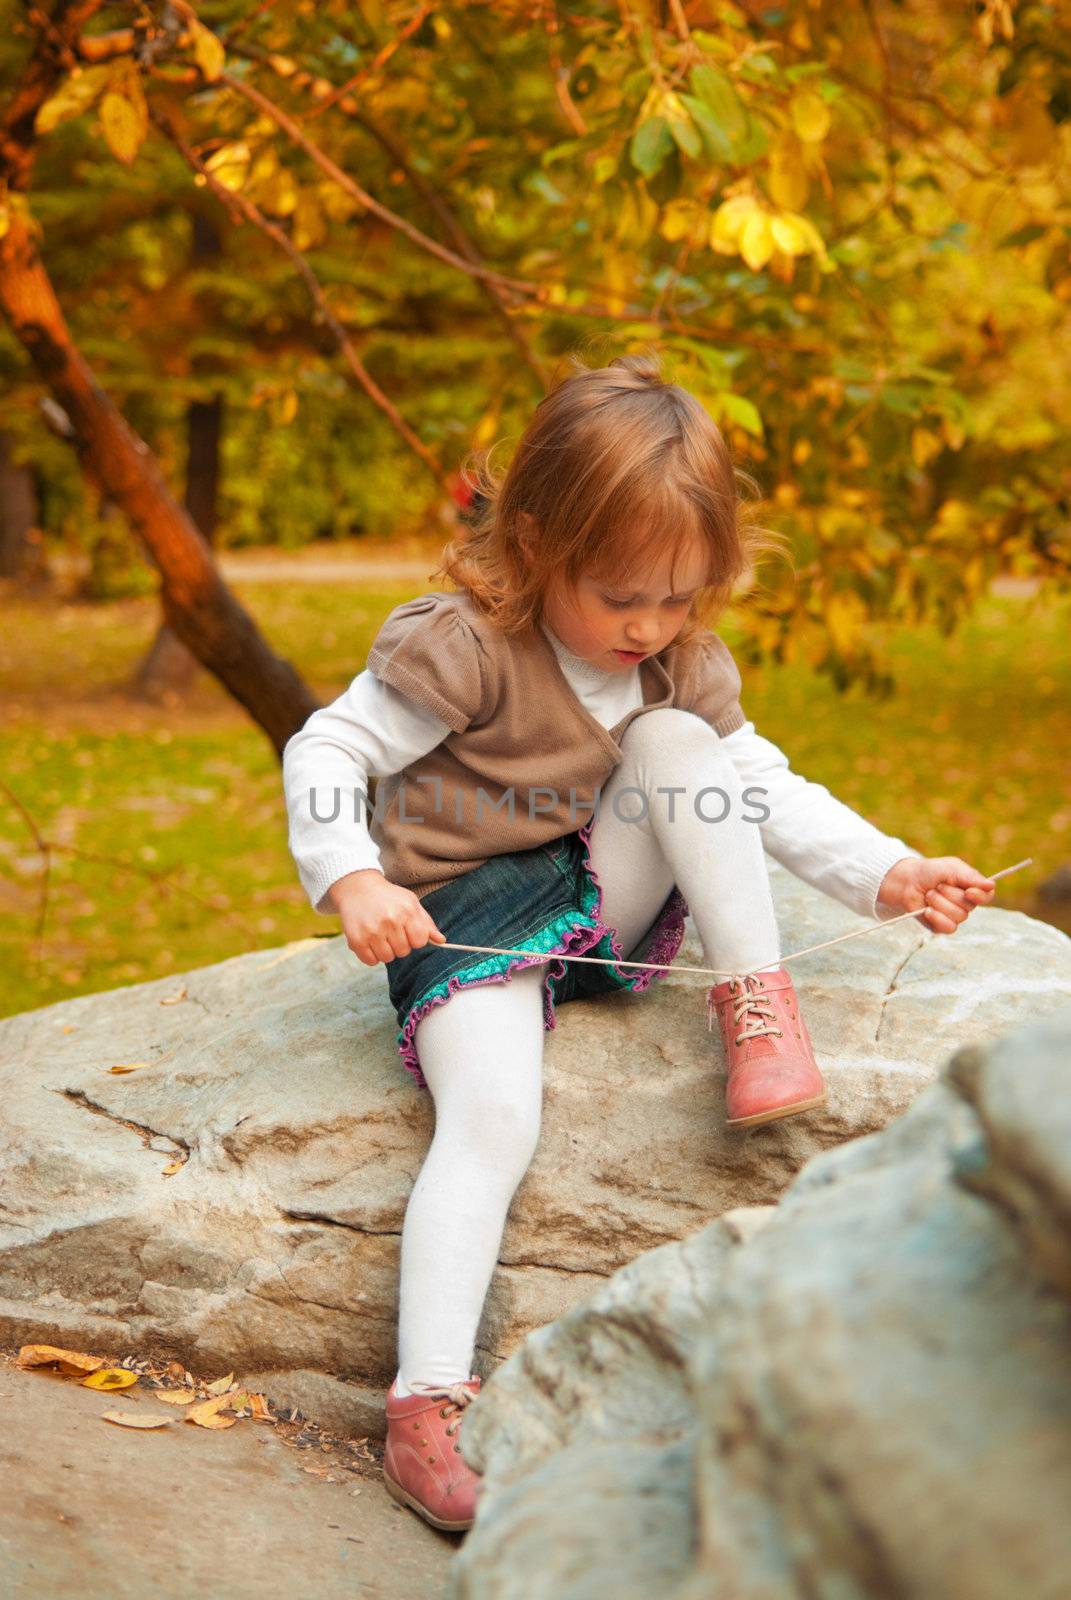 Small girl (3 years) tying shoelace in autumn park